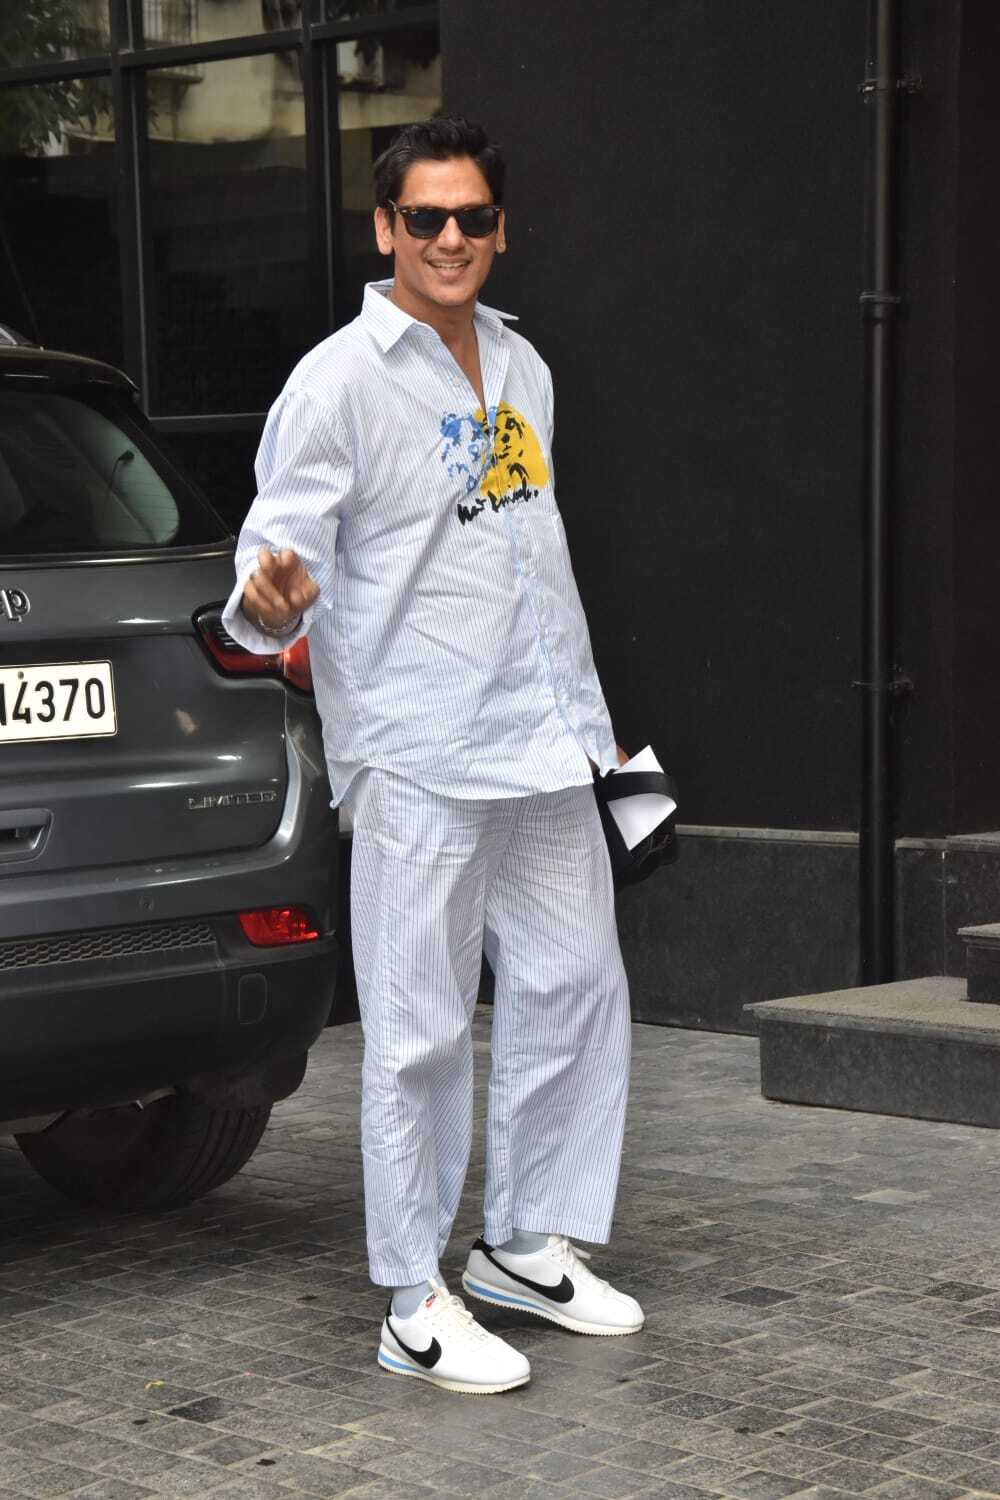 Vijay Varma was clicked wearing cool white outfit as he went out and about in the city